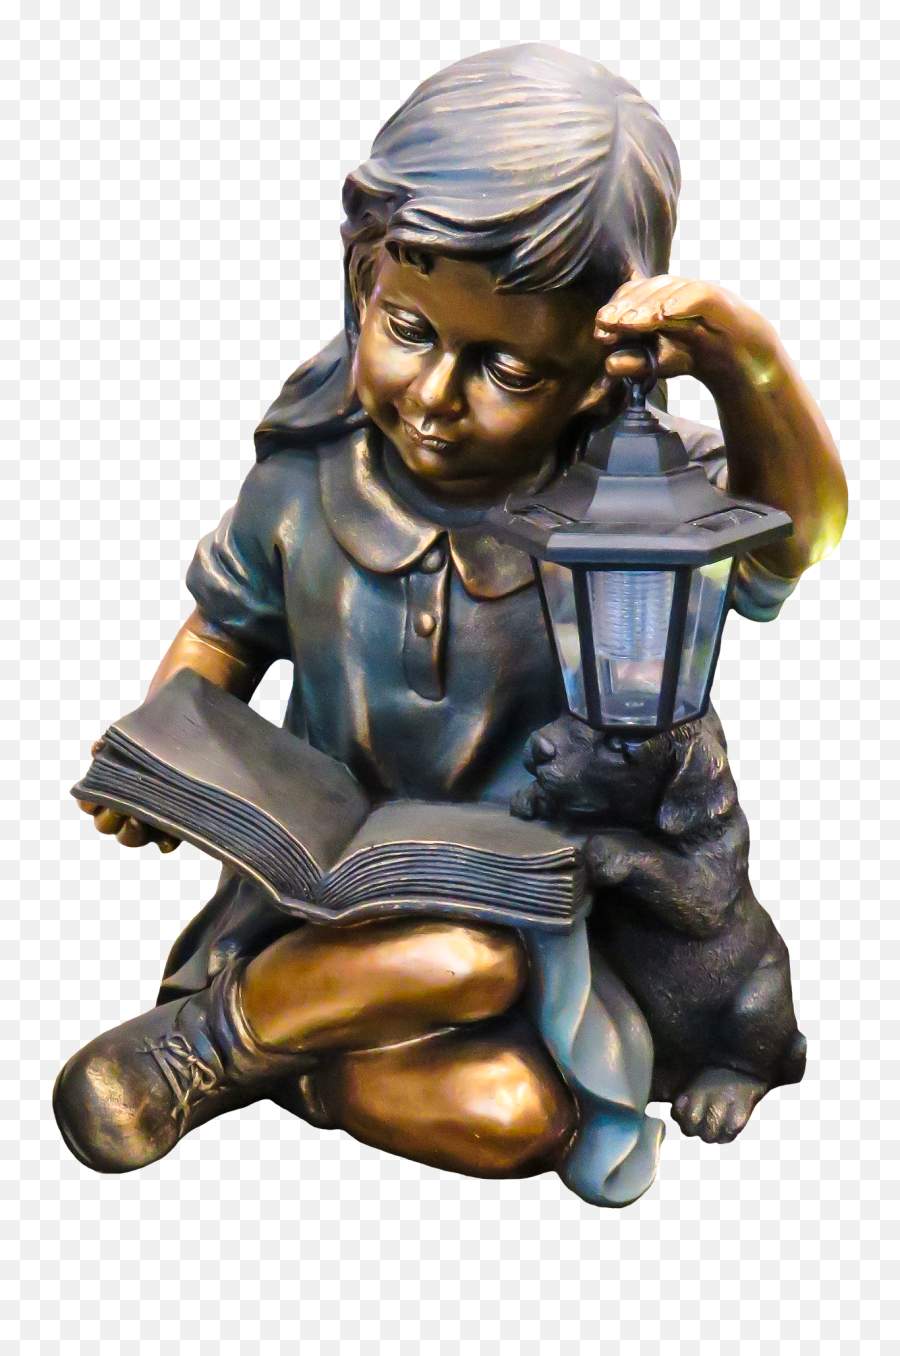 Studying Png - Kid Studying Statue Study Wax Sculpture Statue,Studying Png